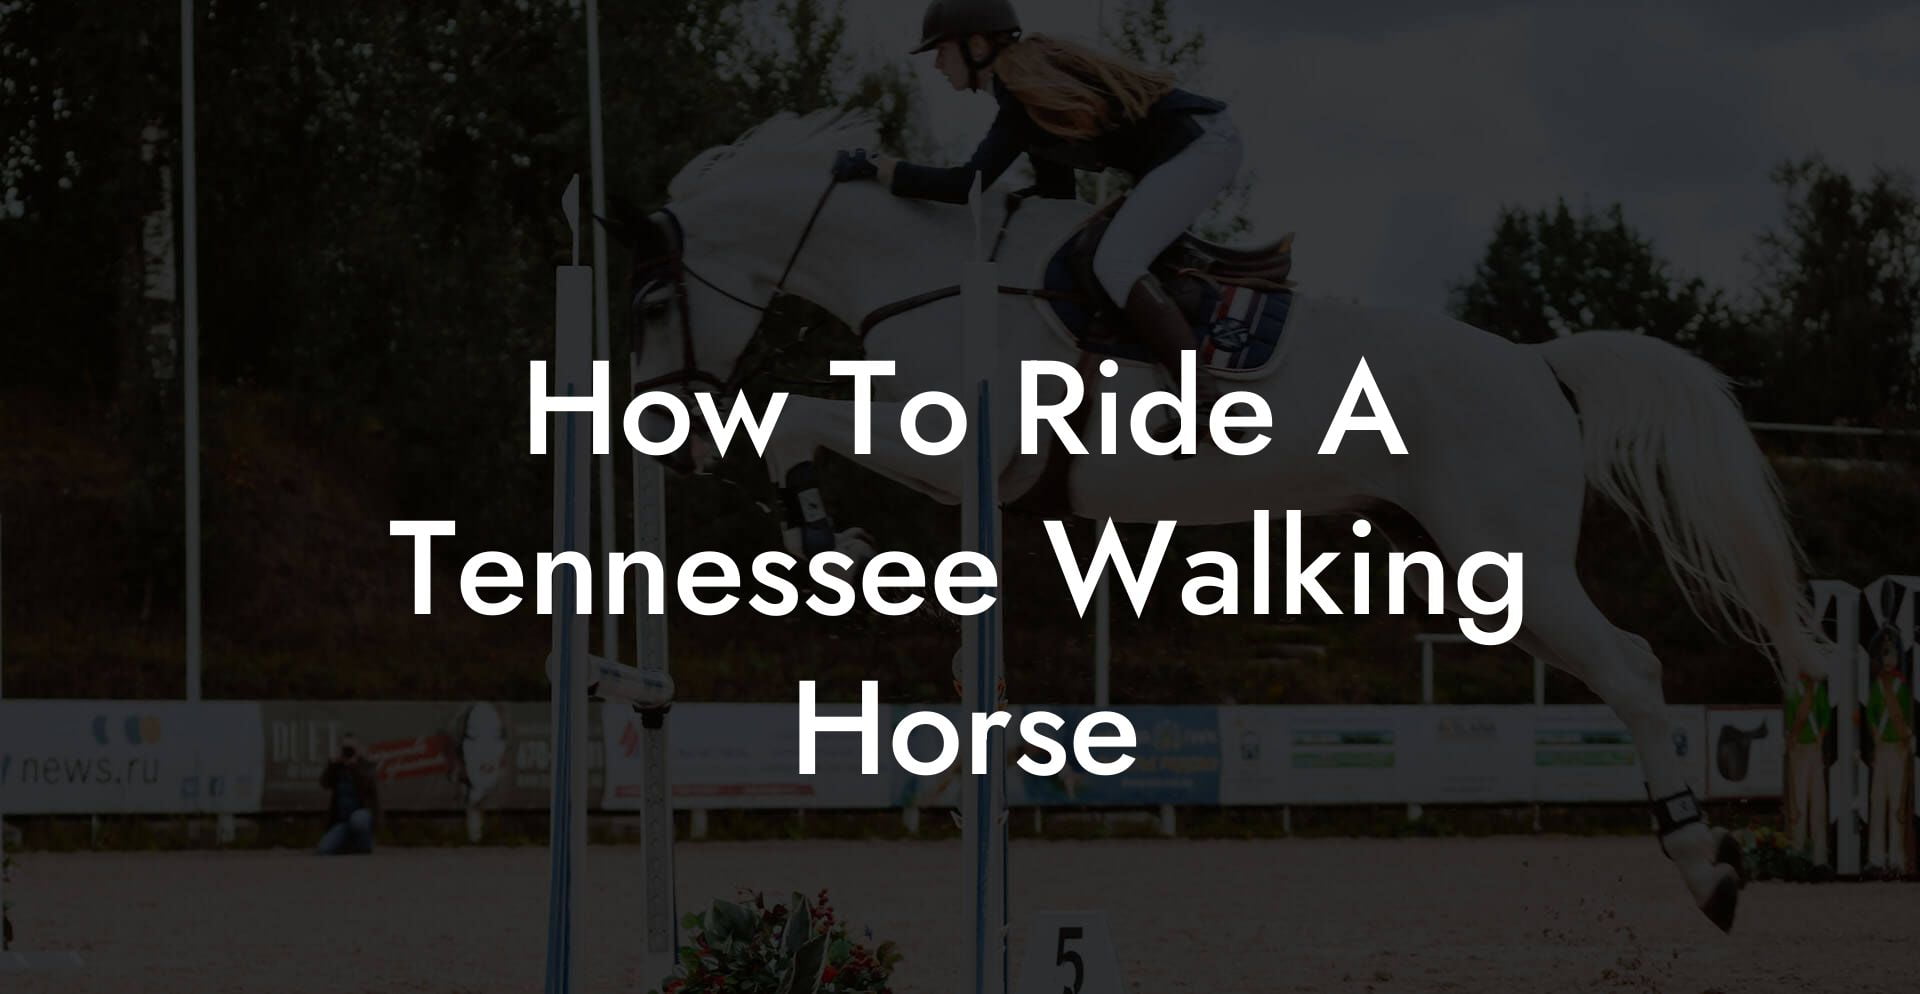 How To Ride A Tennessee Walking Horse